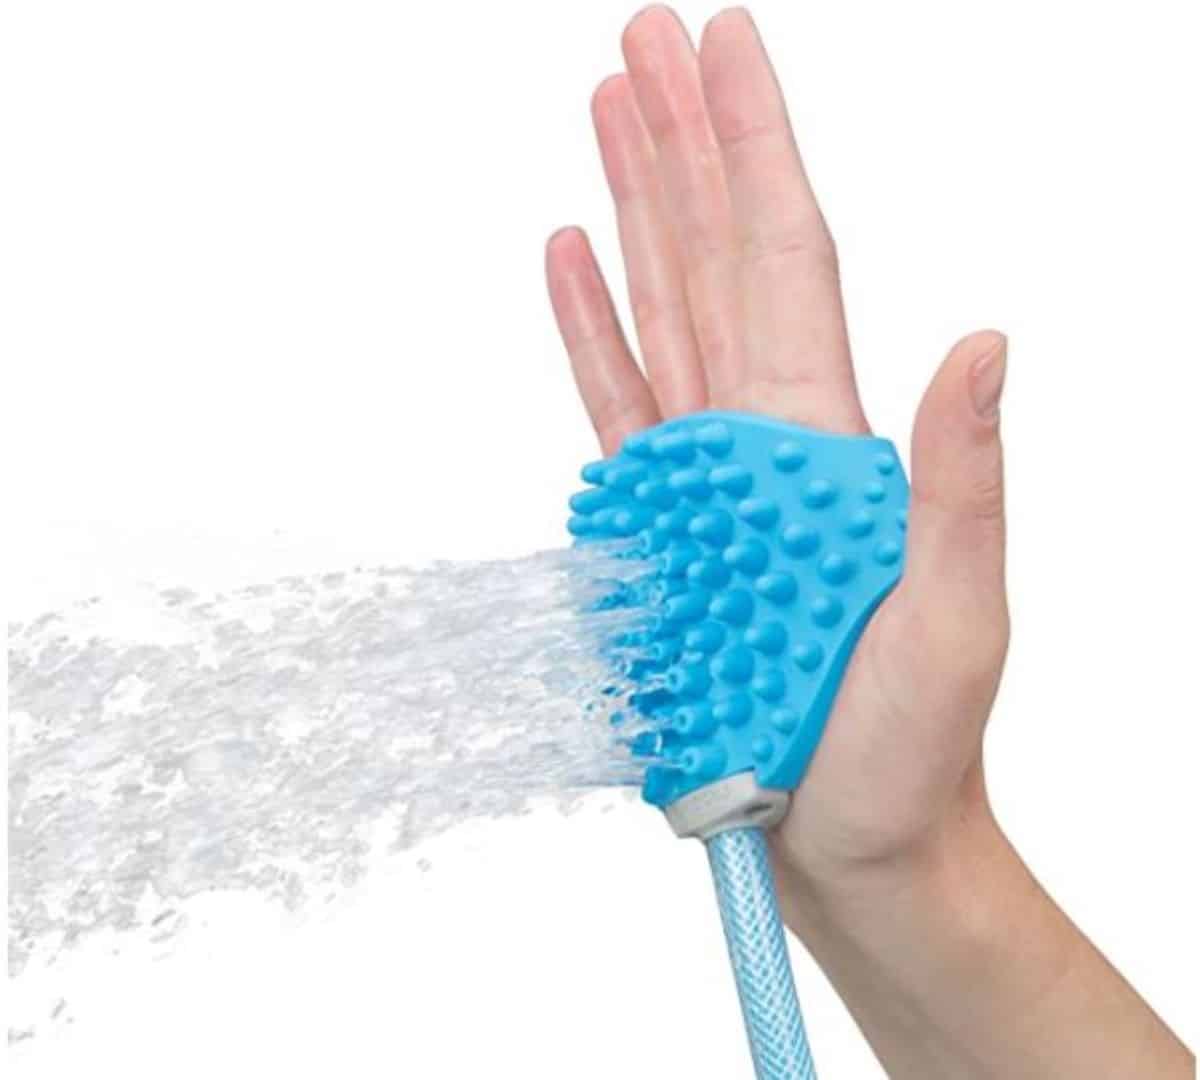 sprayer and scrubber bathing tool 